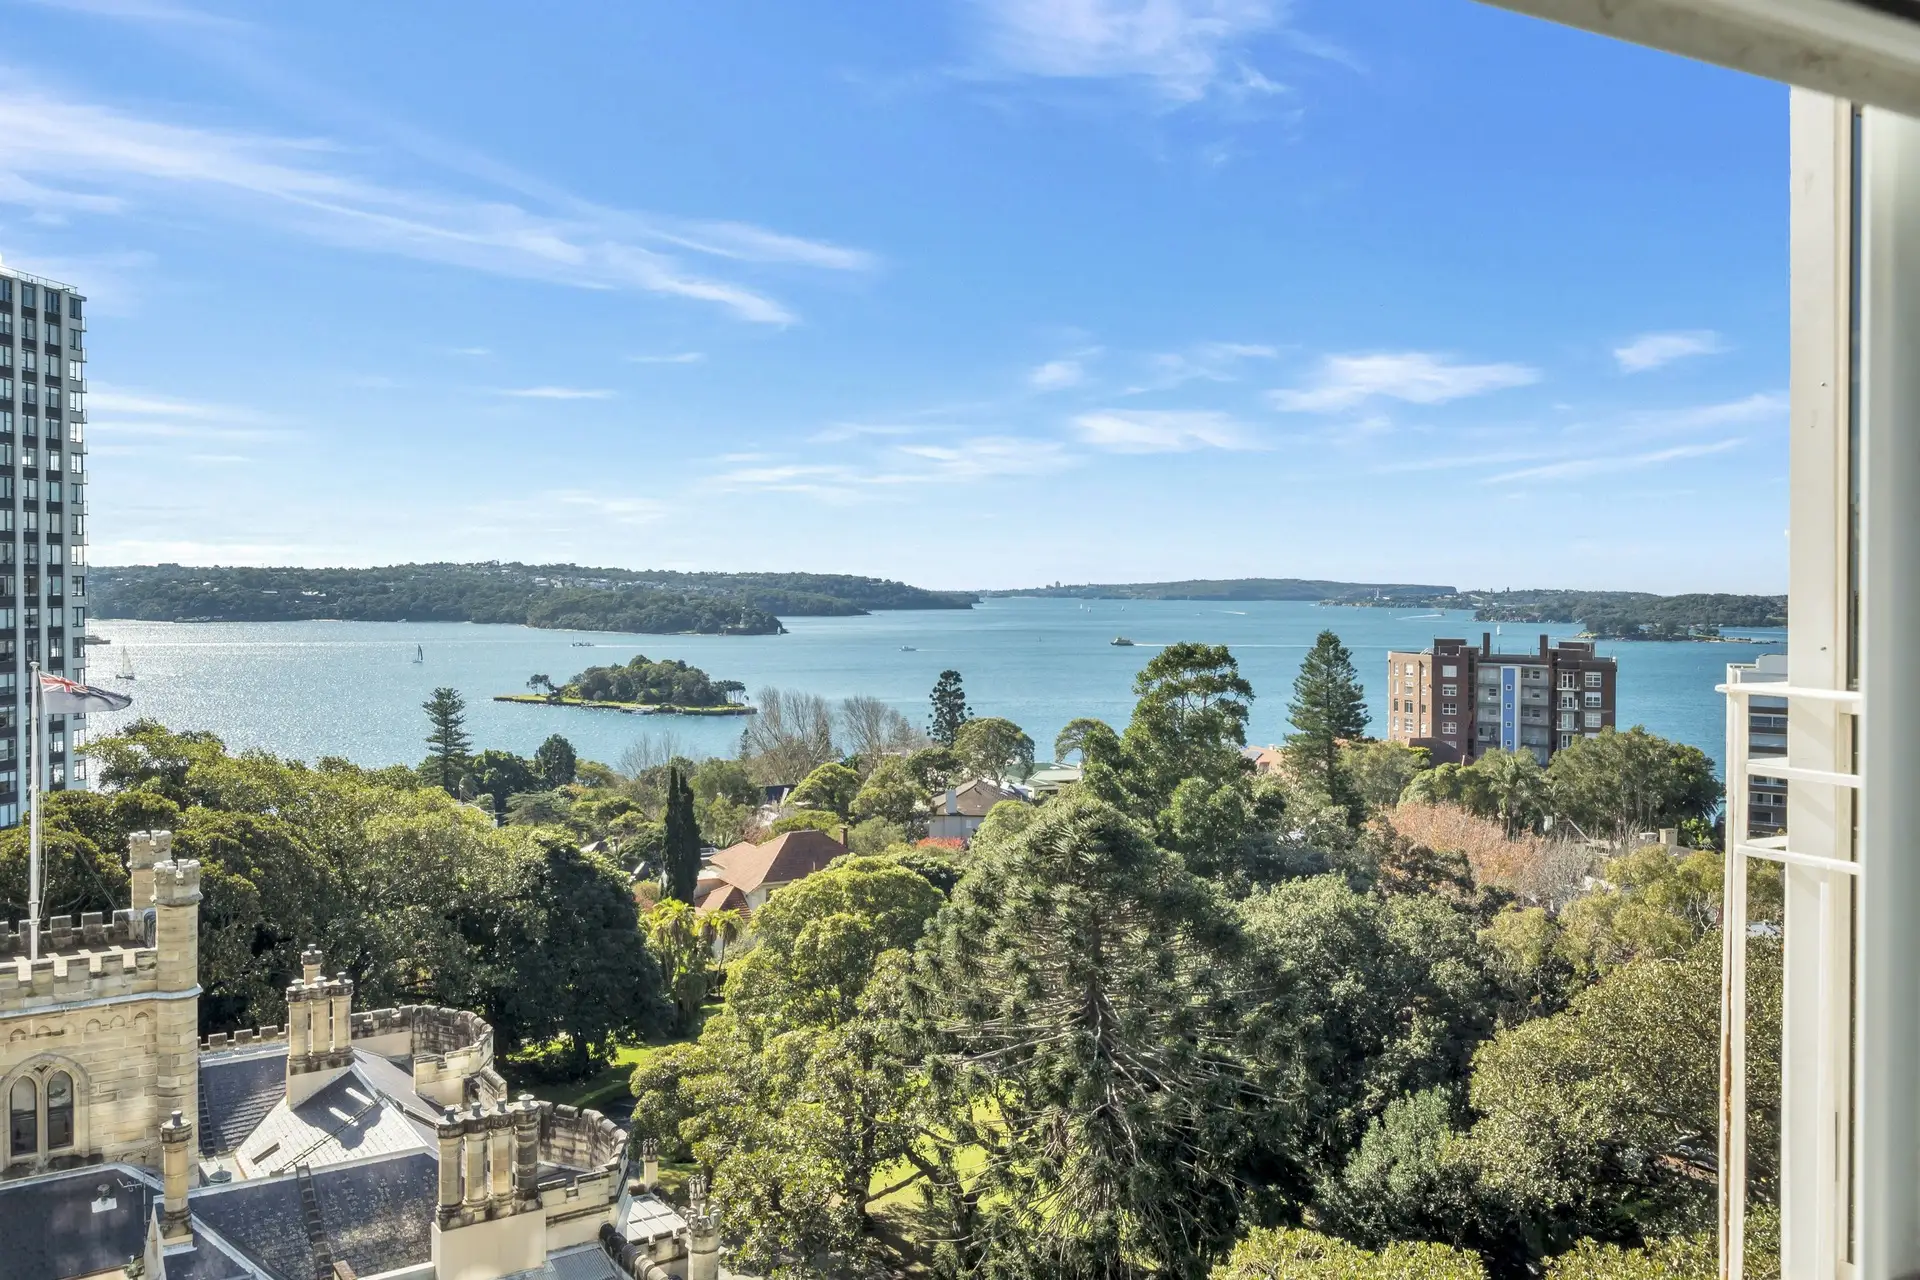 83/66 Darling Point Road, Darling Point Sold by Bradfield Badgerfox - image 1